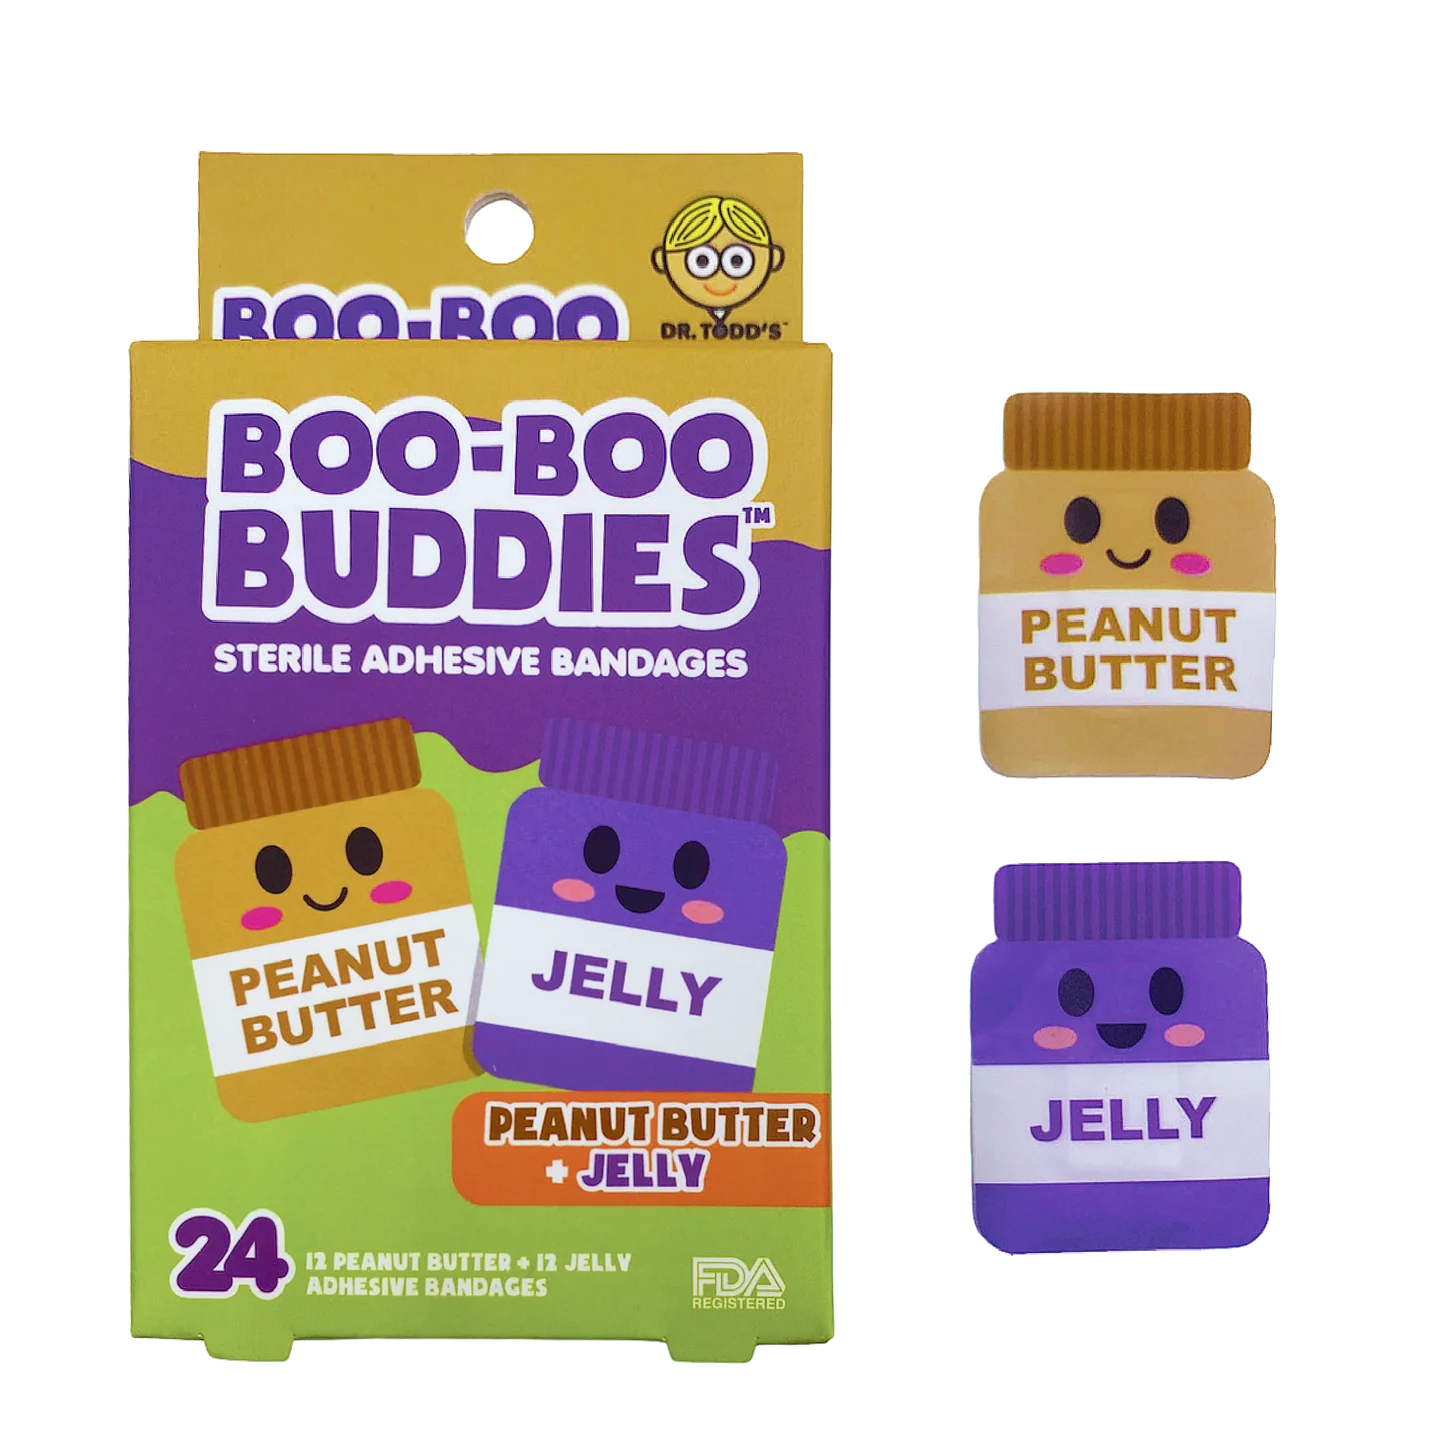 Boo-Boo Buddies: Bandages for your Boo-Boos